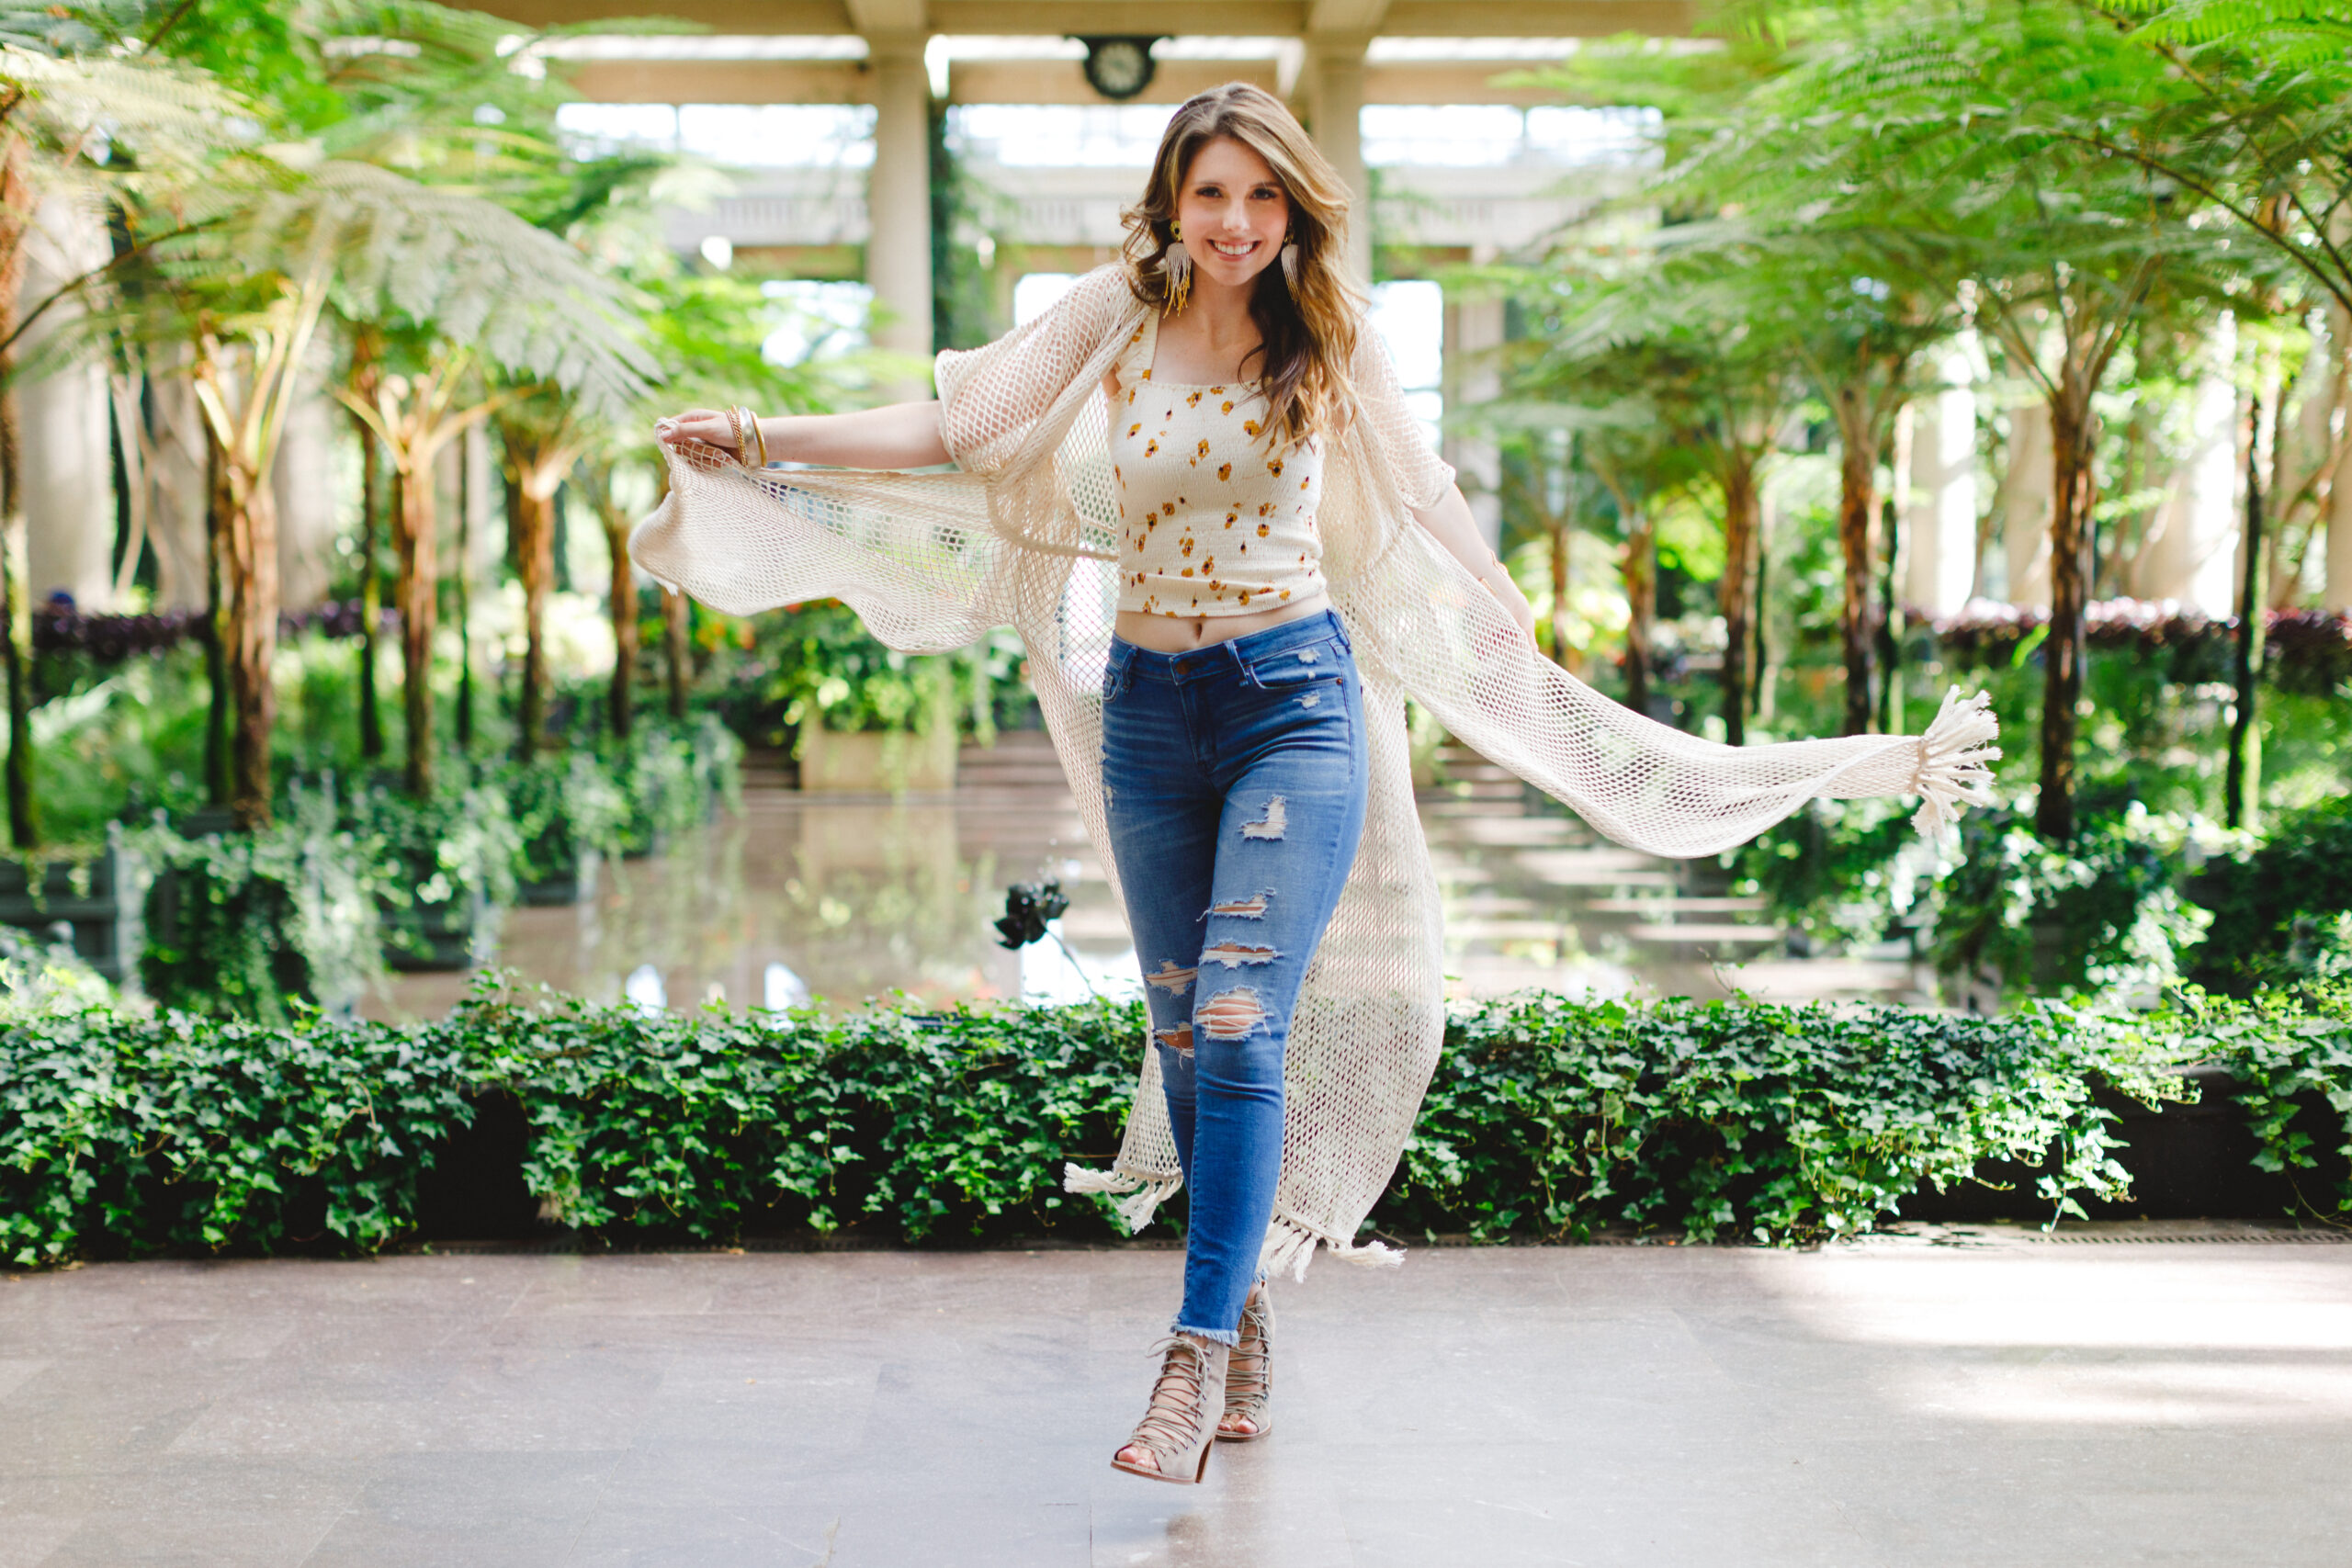 Clare throwing a white netting kimono behind her in jeans and a white floral tank top in the greenhouse at Longwood gardens.